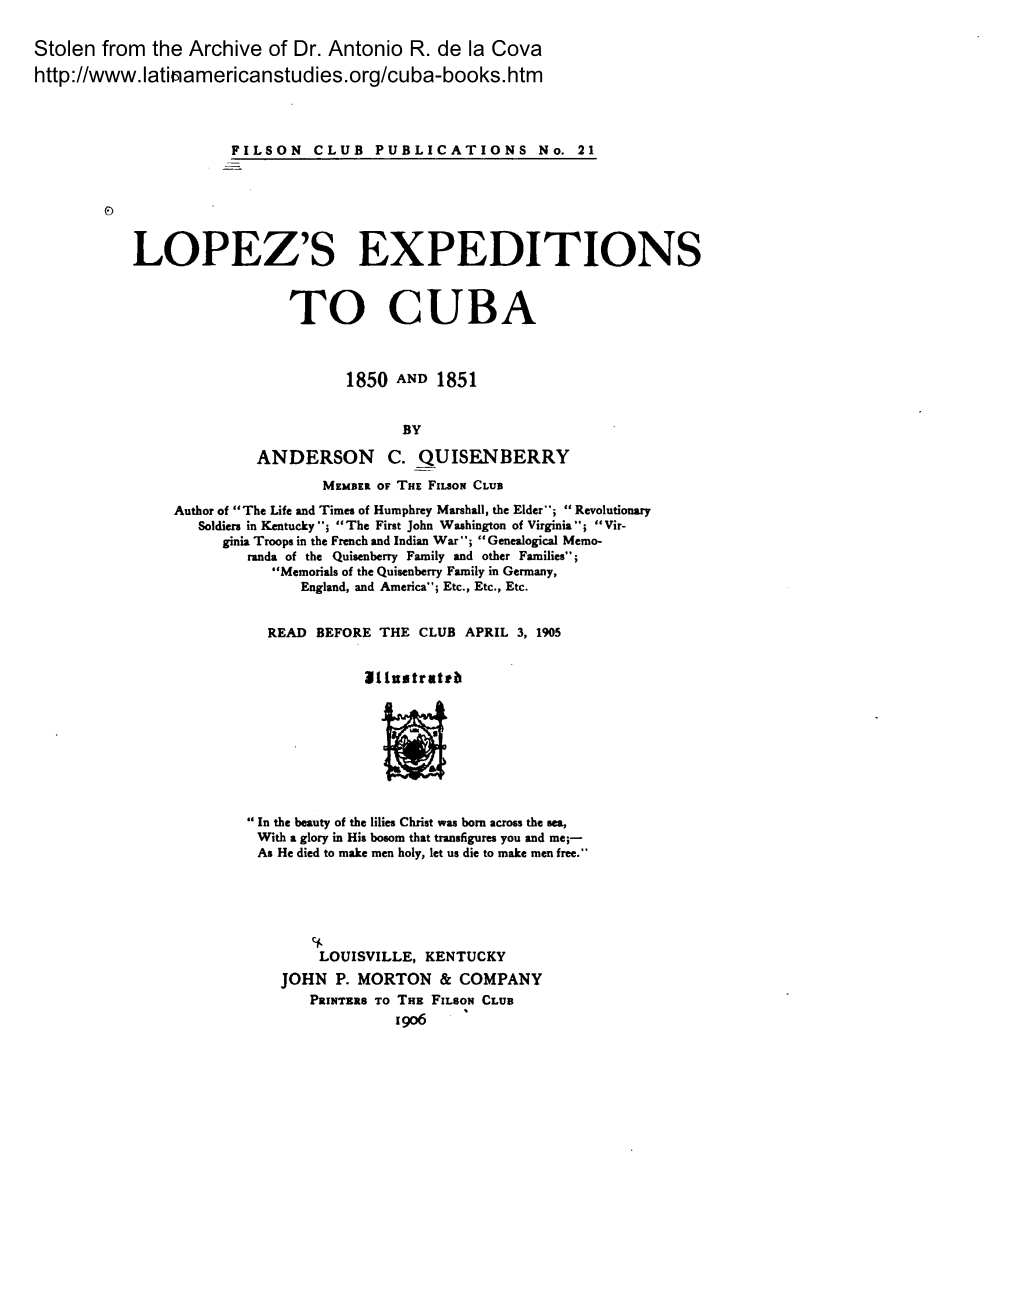 Lopez's Expeditions to Cuba, 1850 and 1851